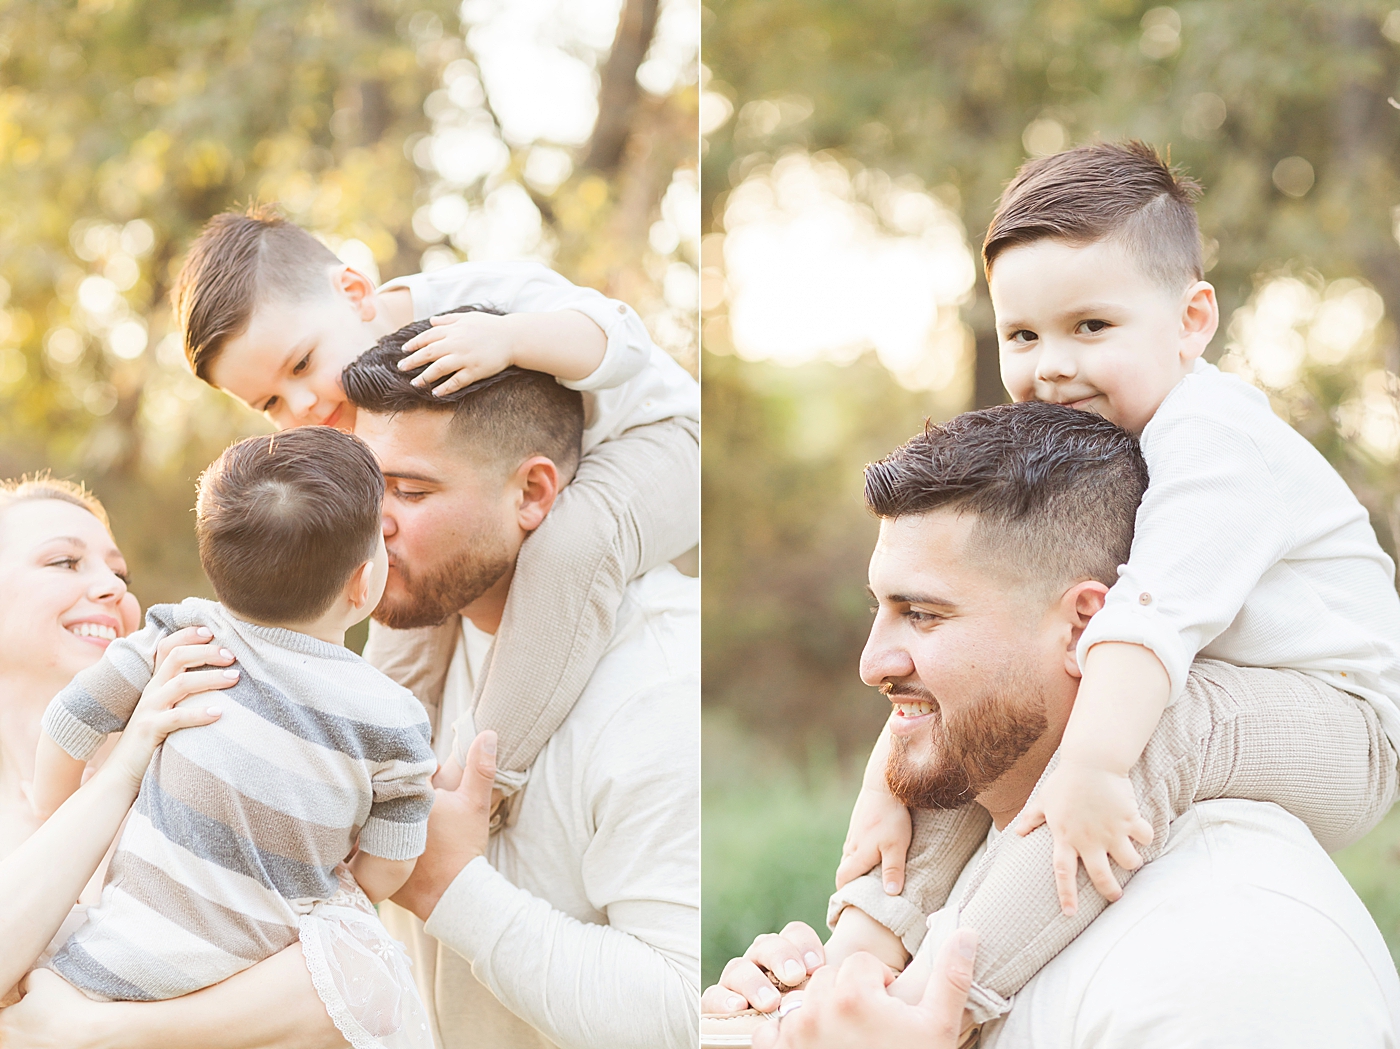 Outdoor family photoshoot. Photo by Fresh Light Photography.